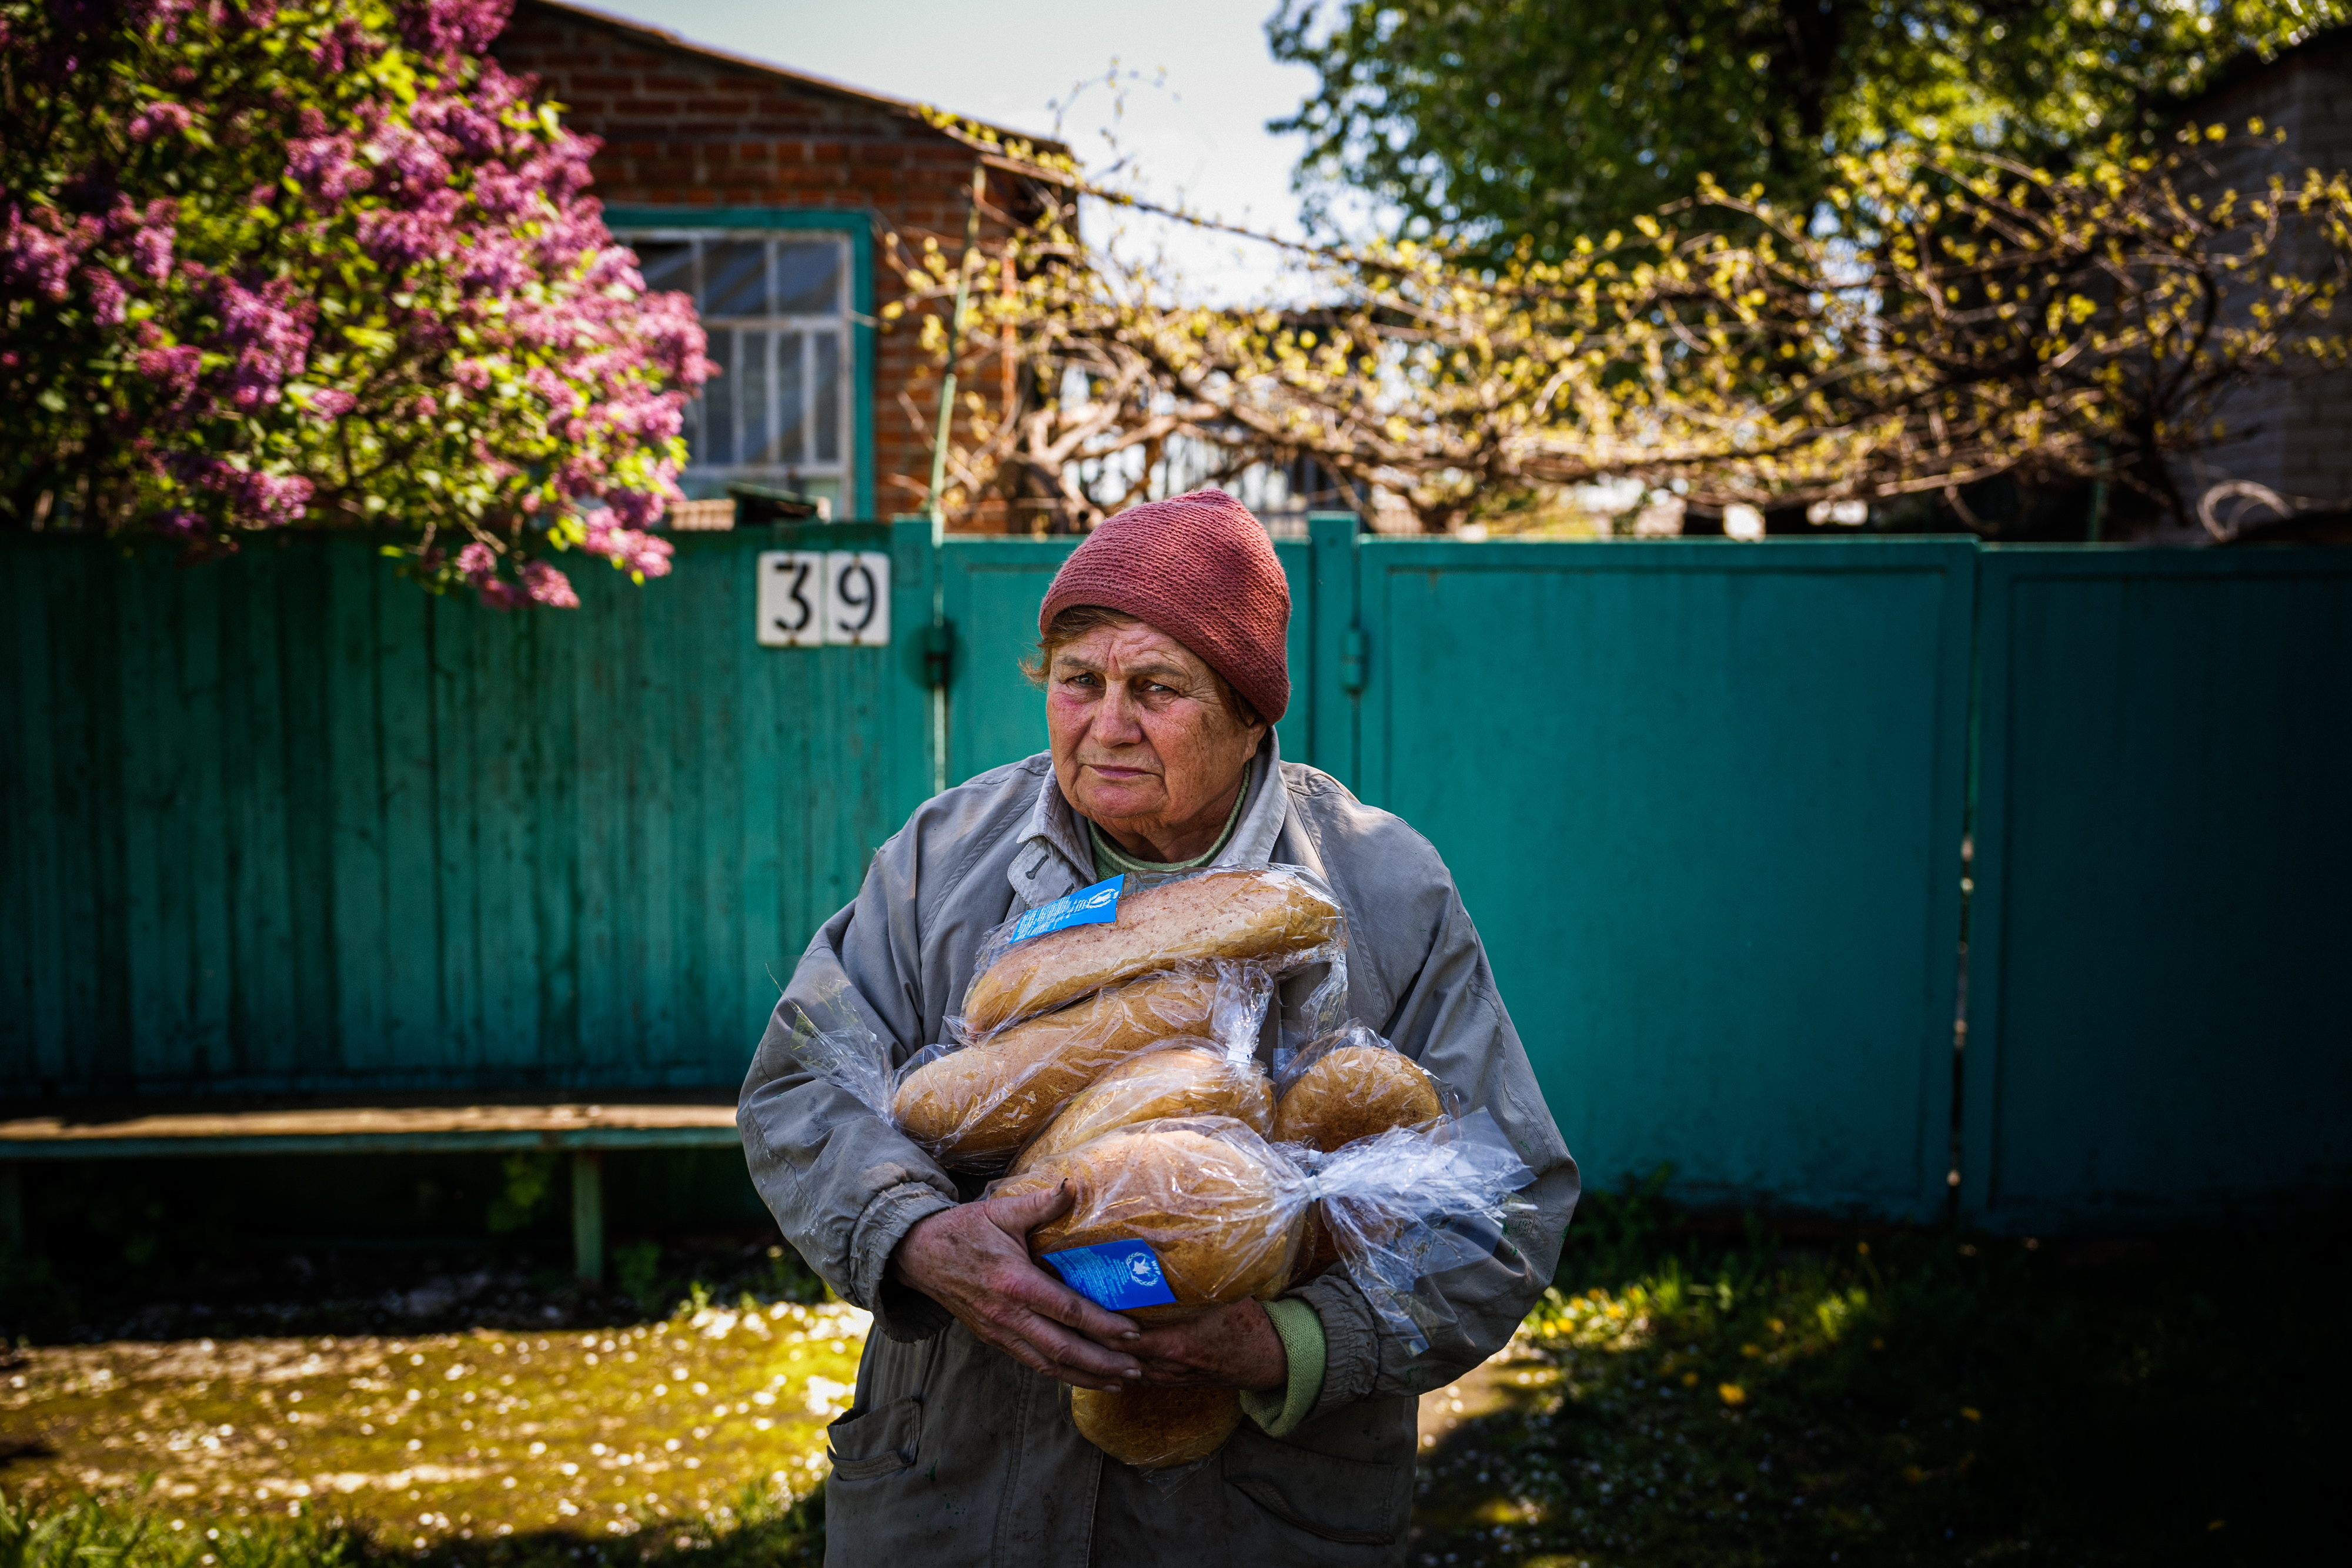 bags of bread at a distribution spot in Siversk, Donetsk region